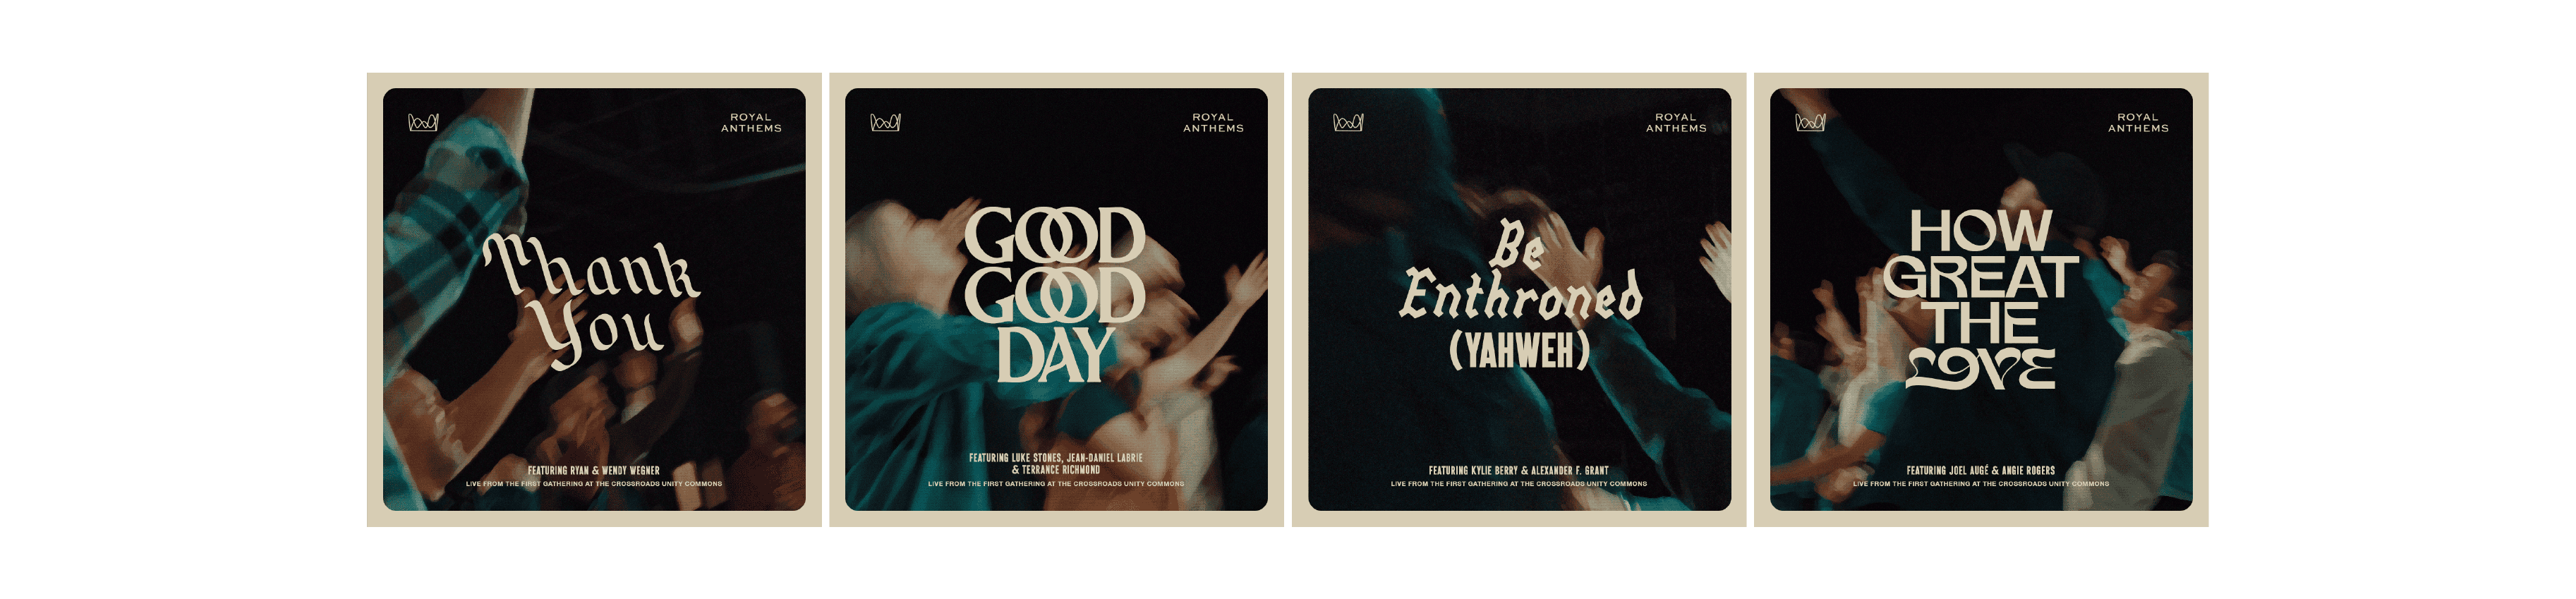 June 28: ‘Thank You’

July 26: ‘Good Good Day’

August 30: ‘Be Enthroned’

September 27: ‘How Great the Love’